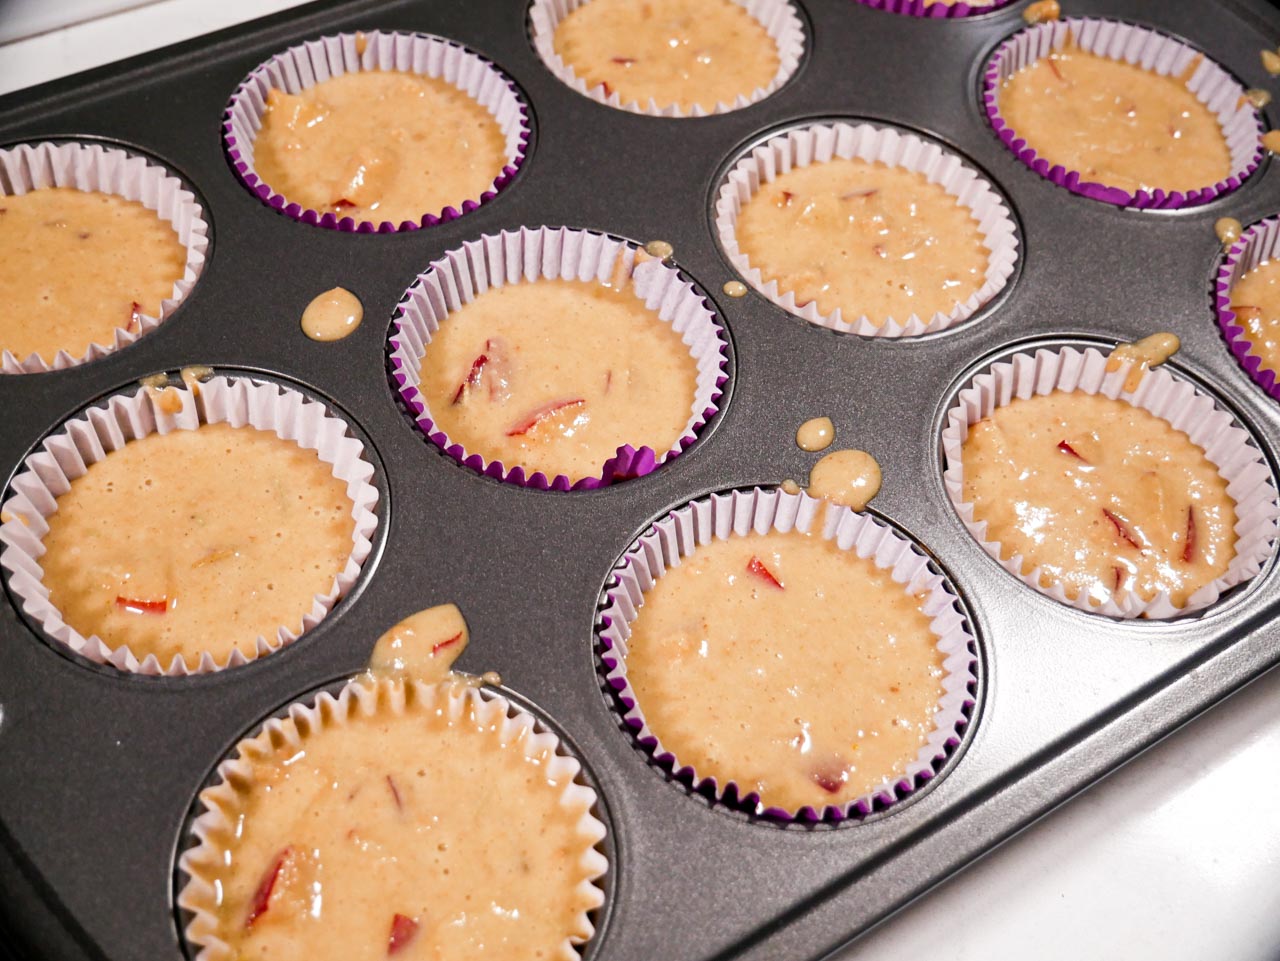 Plum muffin batter in cupcake liners